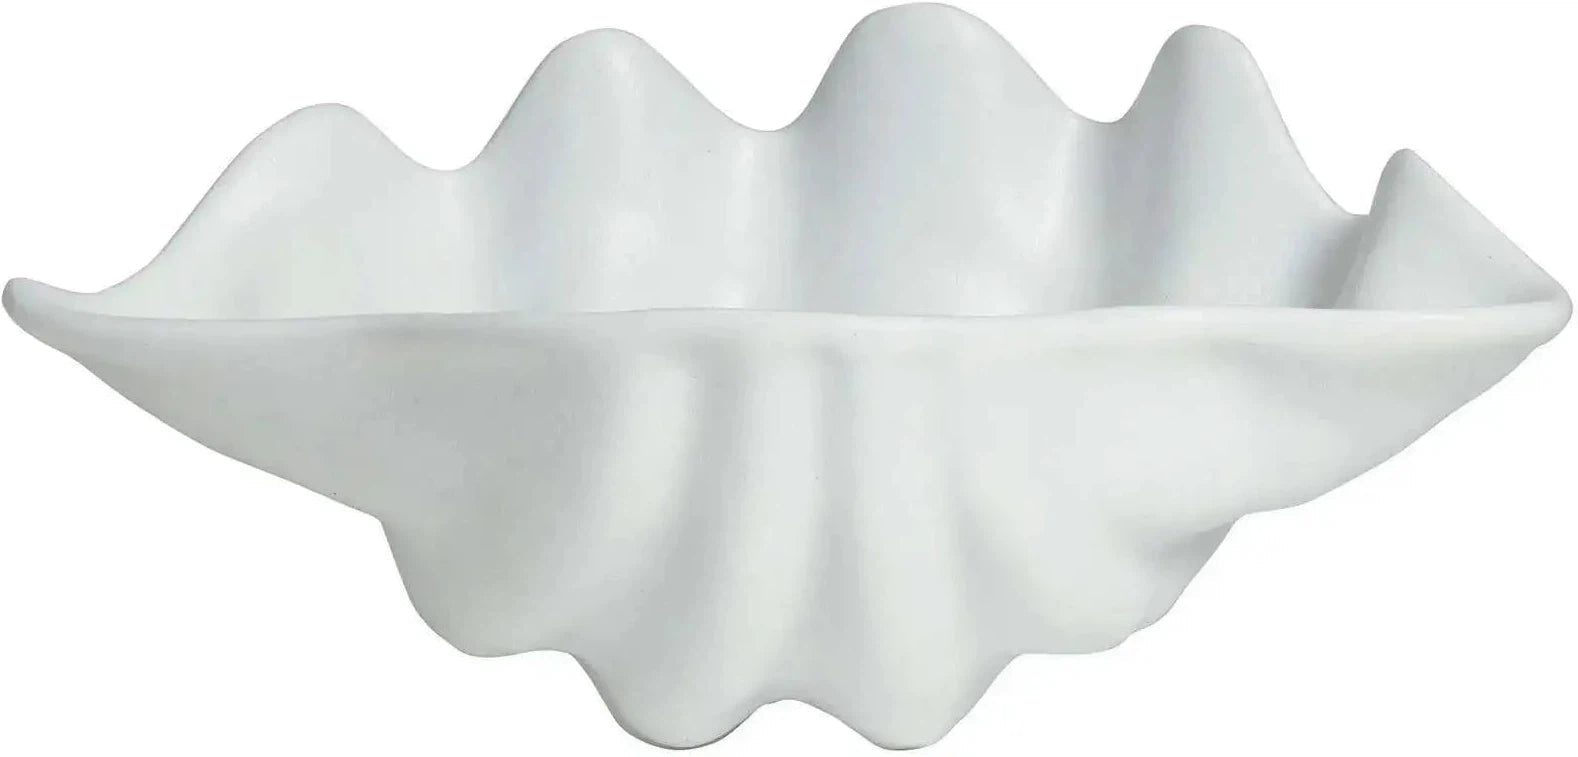 Bugambilia - Mod 10.1 Oz Small White Shell Ceviche Shell Plate With Glossy Smooth Finish - SC002-MOD-WW